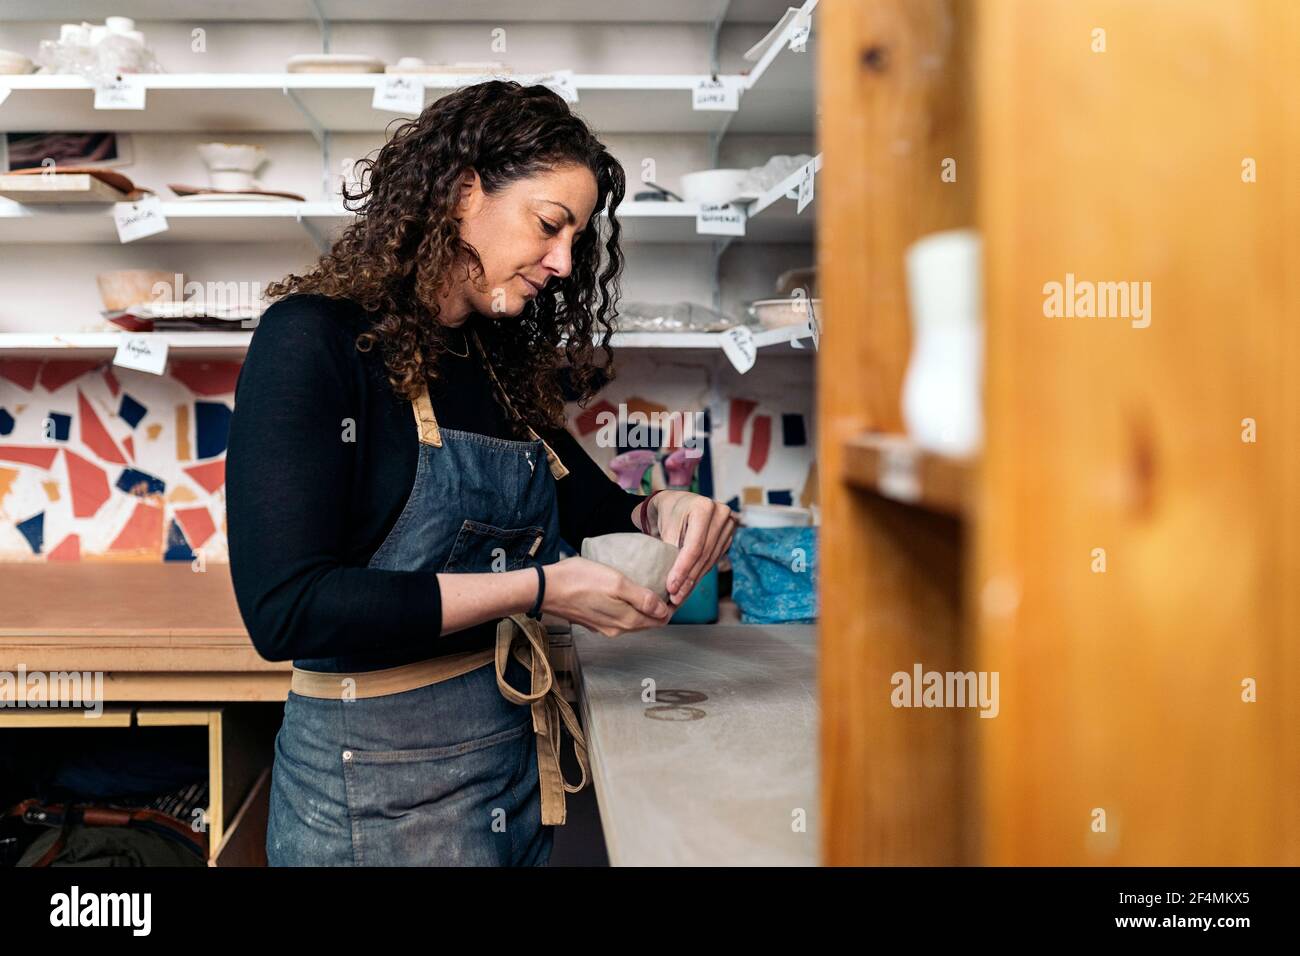 Stock photo of focused woman shaping clay during her pottery class. Stock Photo